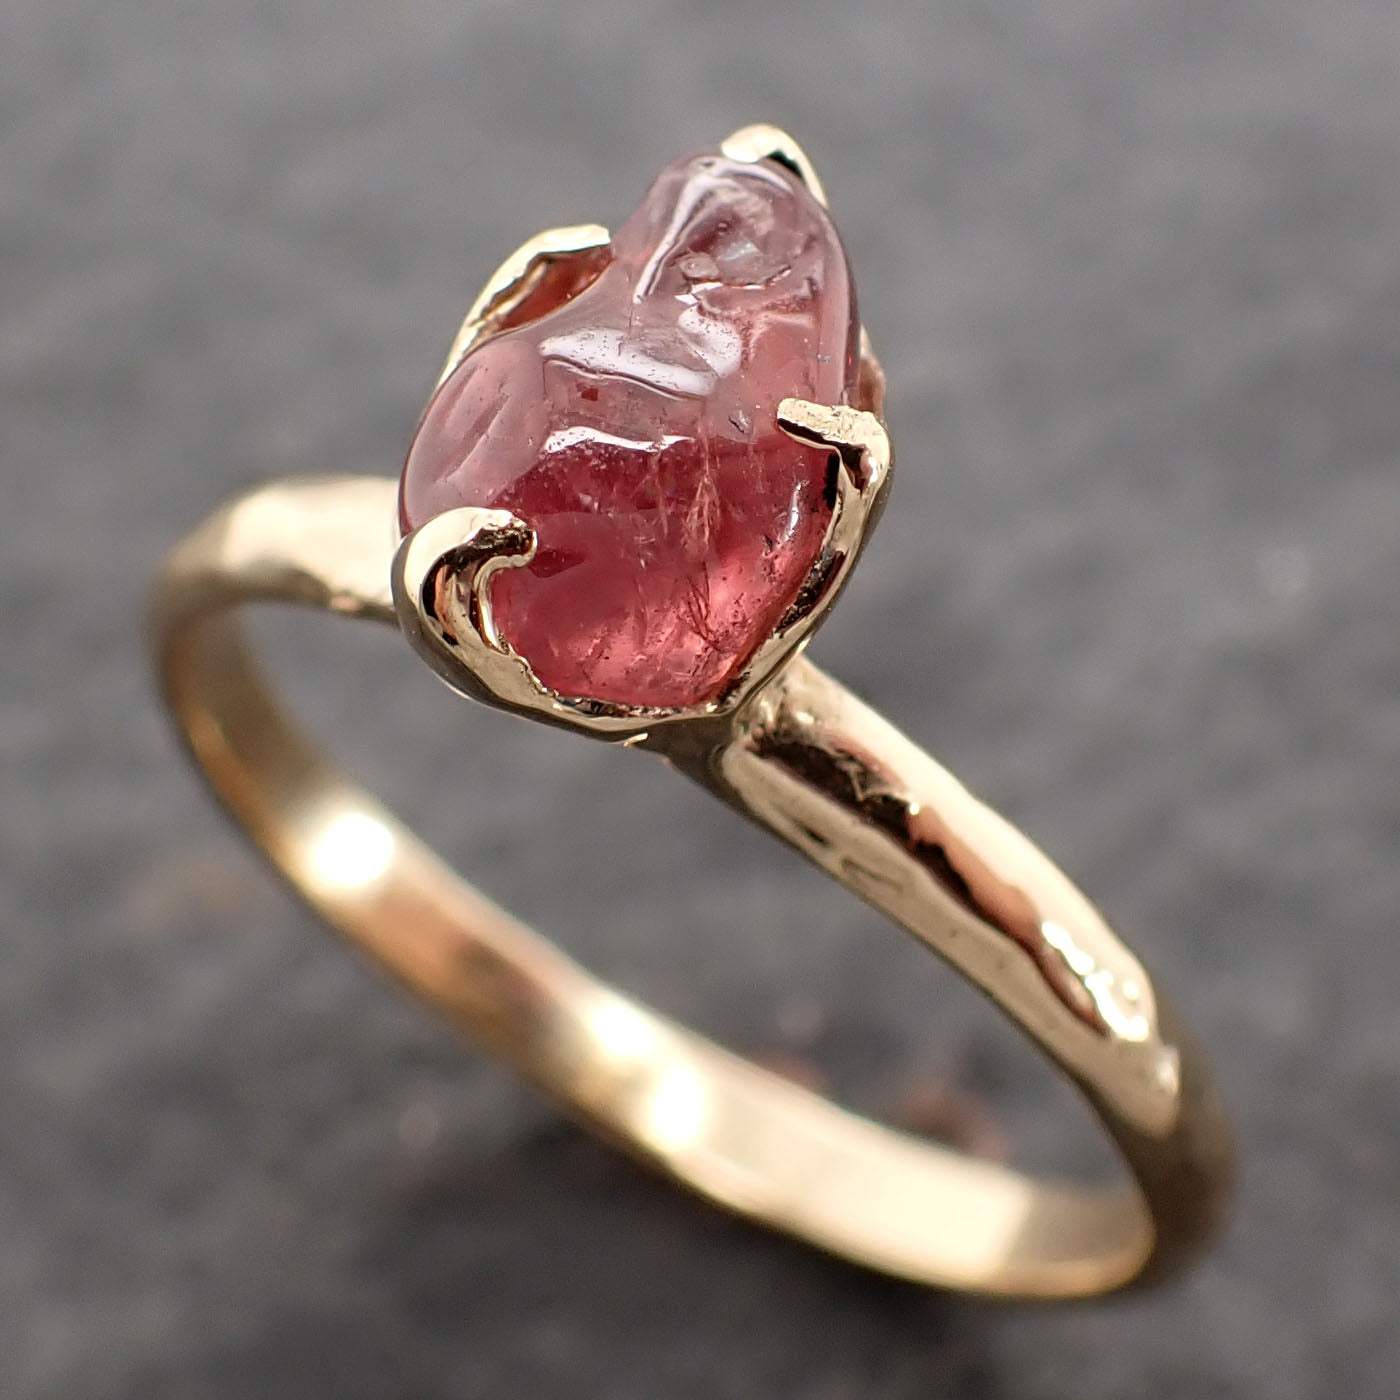 Sapphire tumbled pink tumbled yellow 18k gold Solitaire gemstone ring 2637